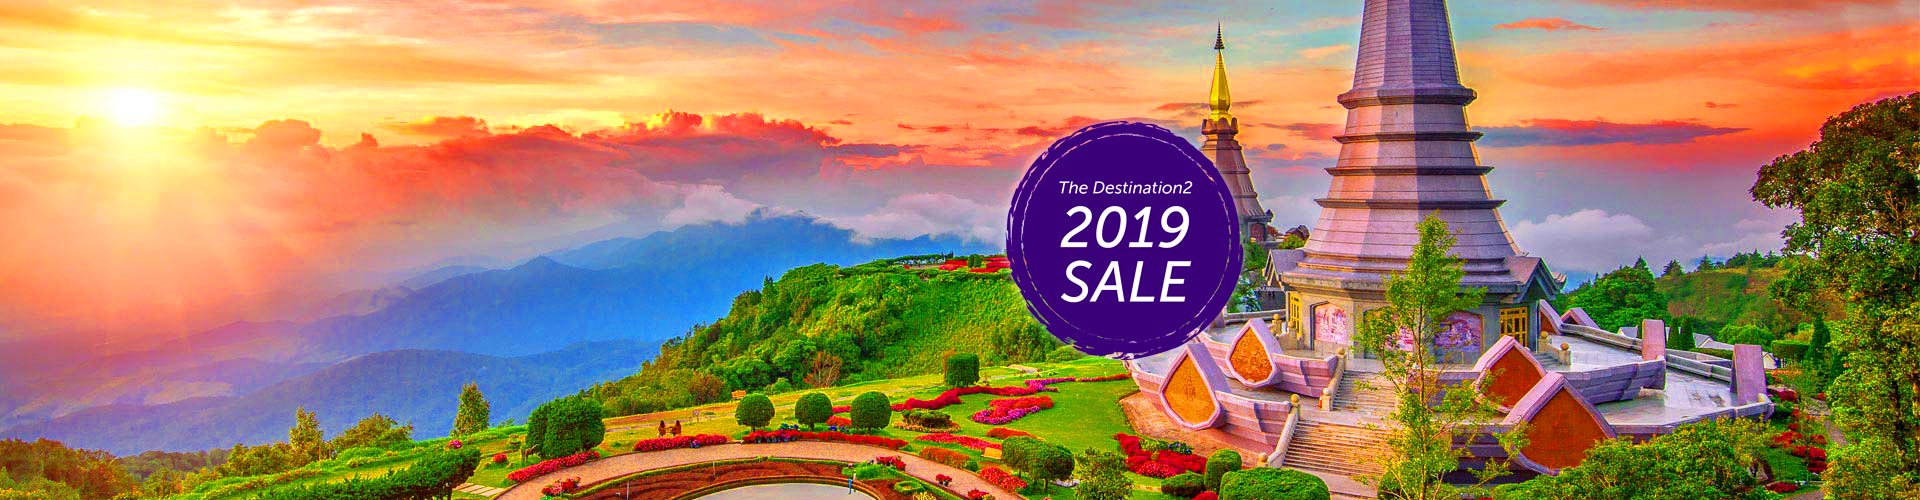 Thailand Holidays 2019/2020 - Cheap Thailand Holiday Packages